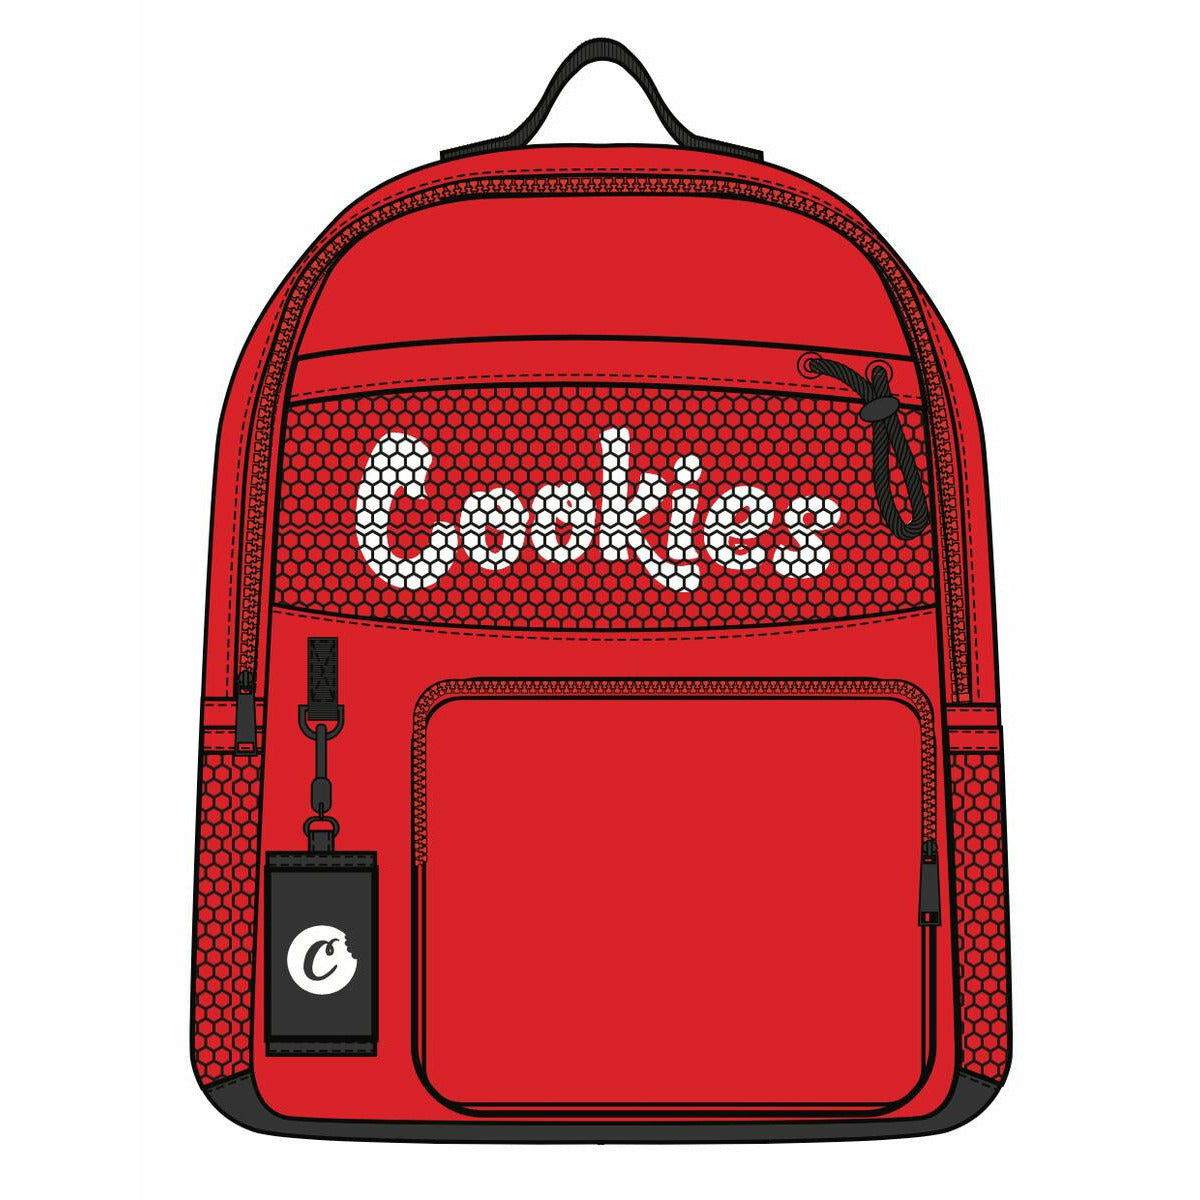 Cookies Charter Smell Proof Red Shoulder Bag – Fresh Society